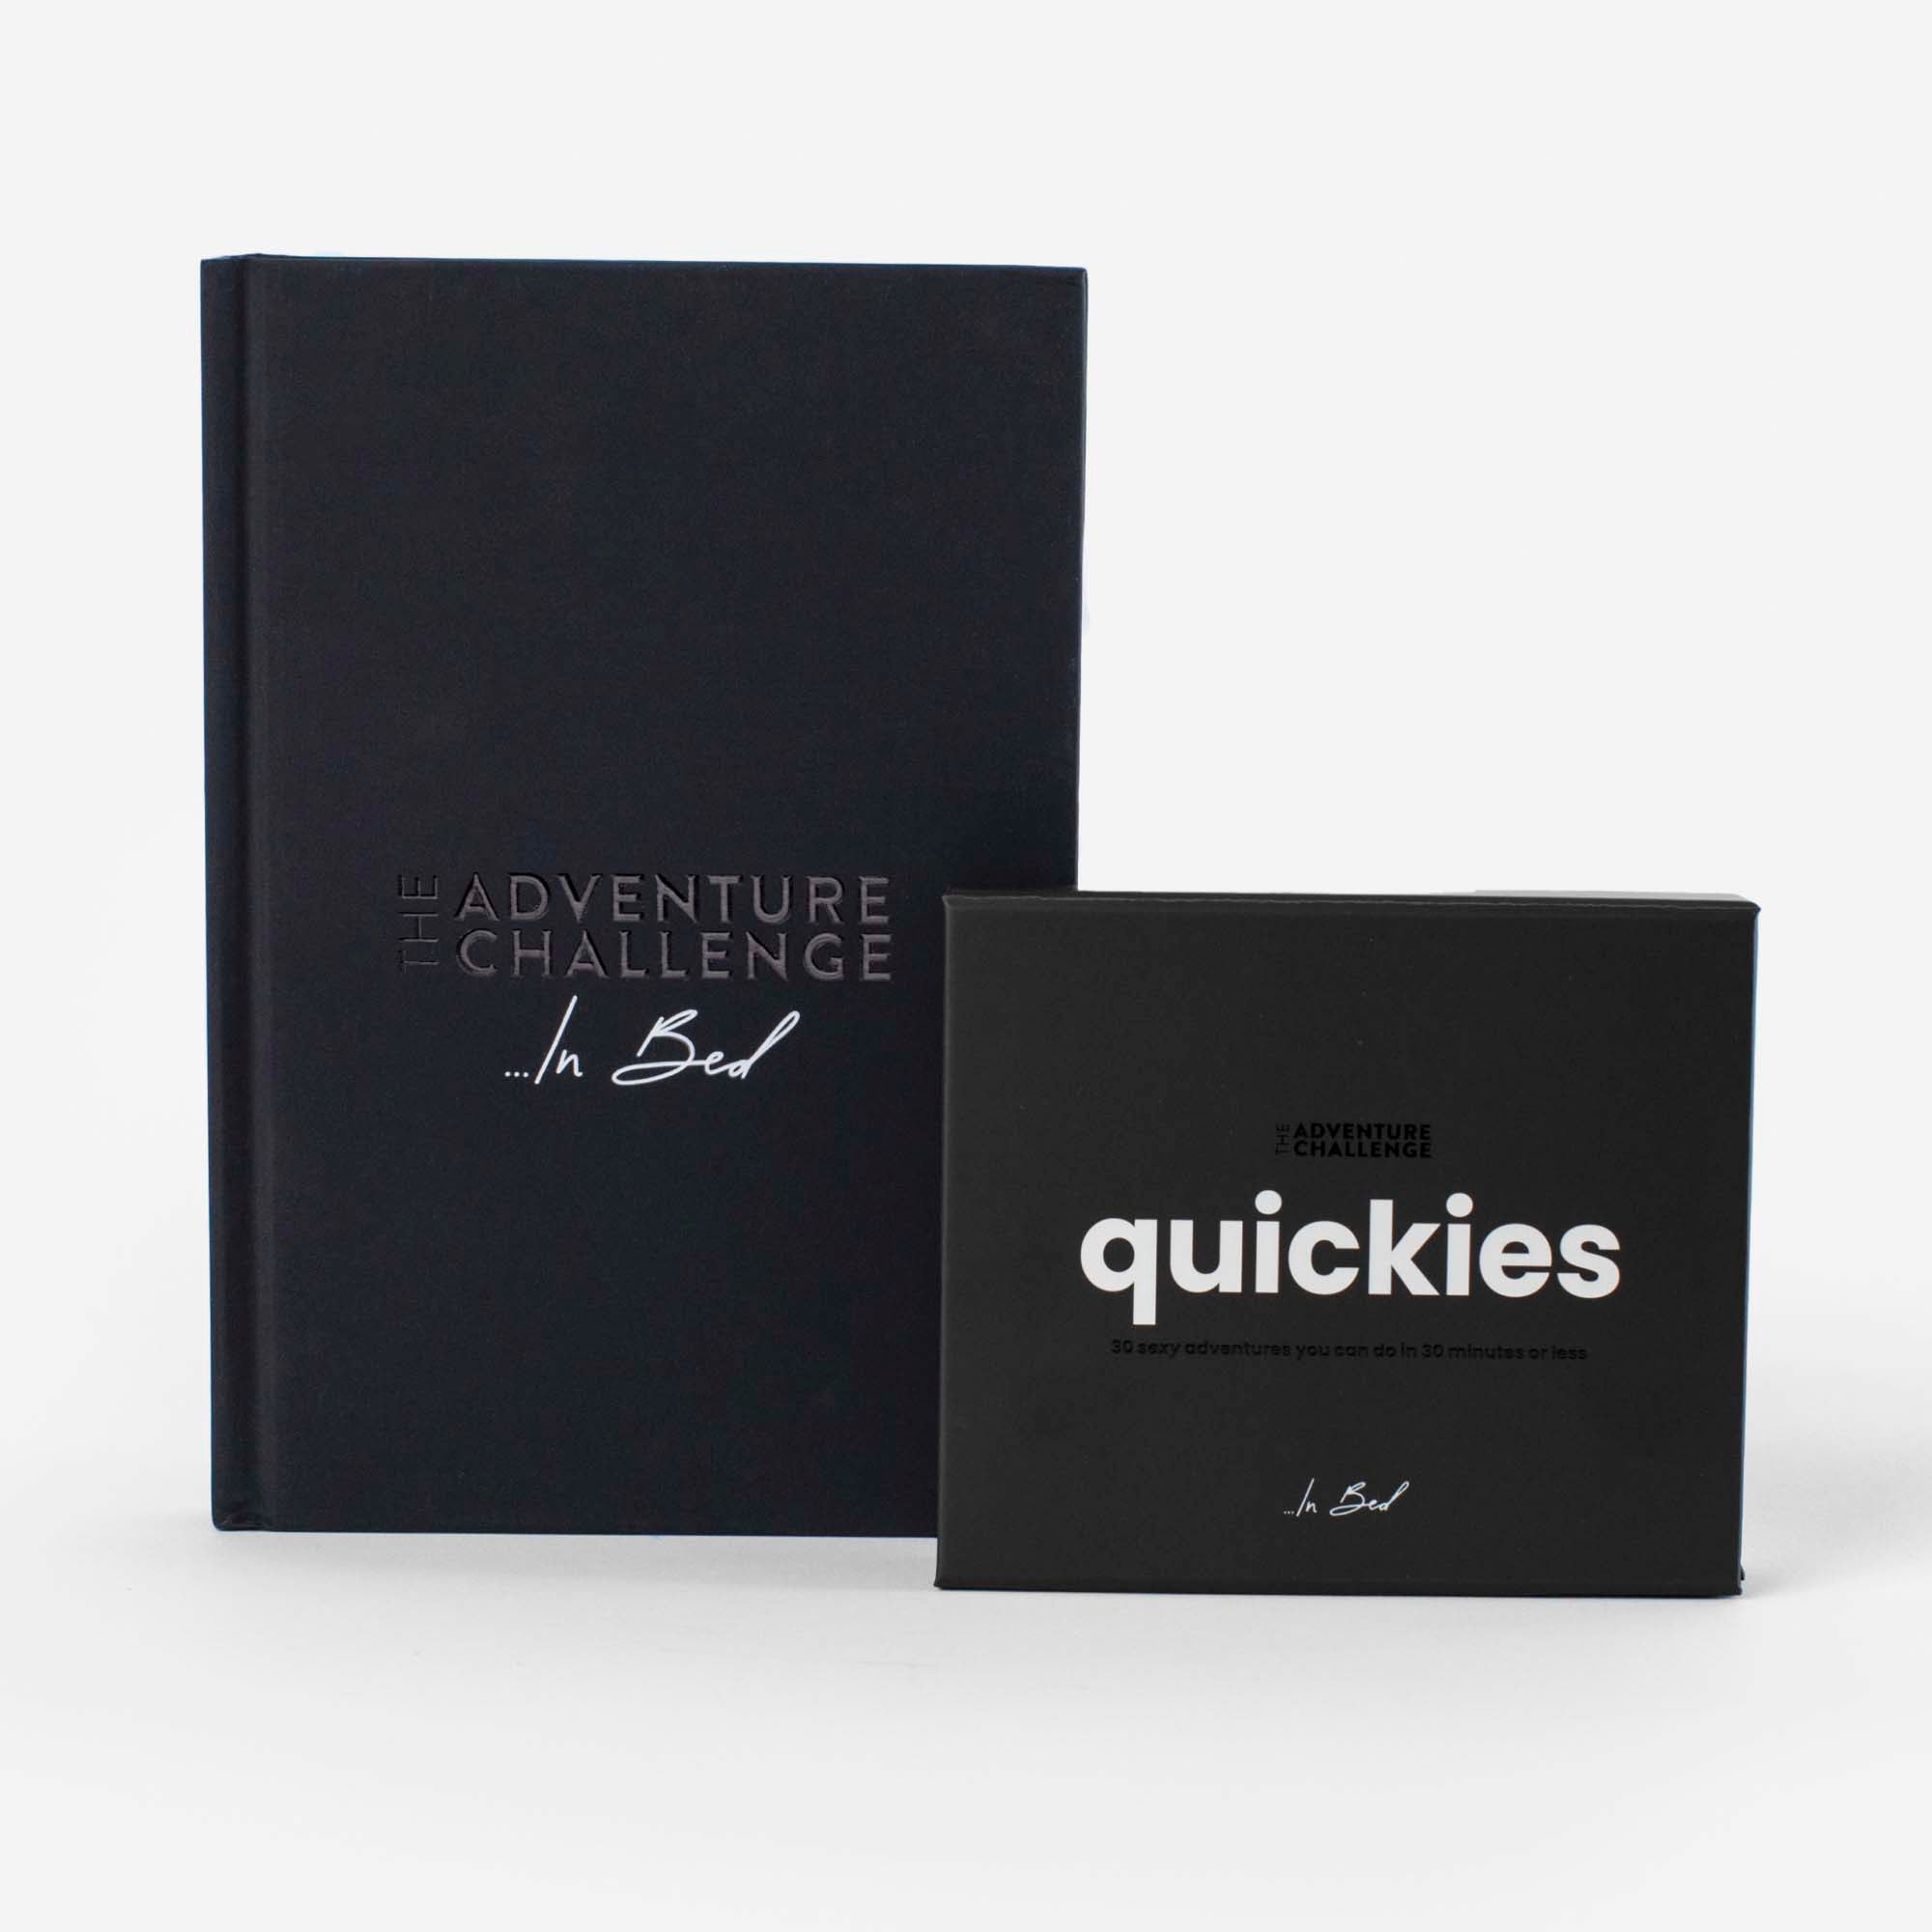 The Adventure Challenge: What's in our NEW Quickies product?